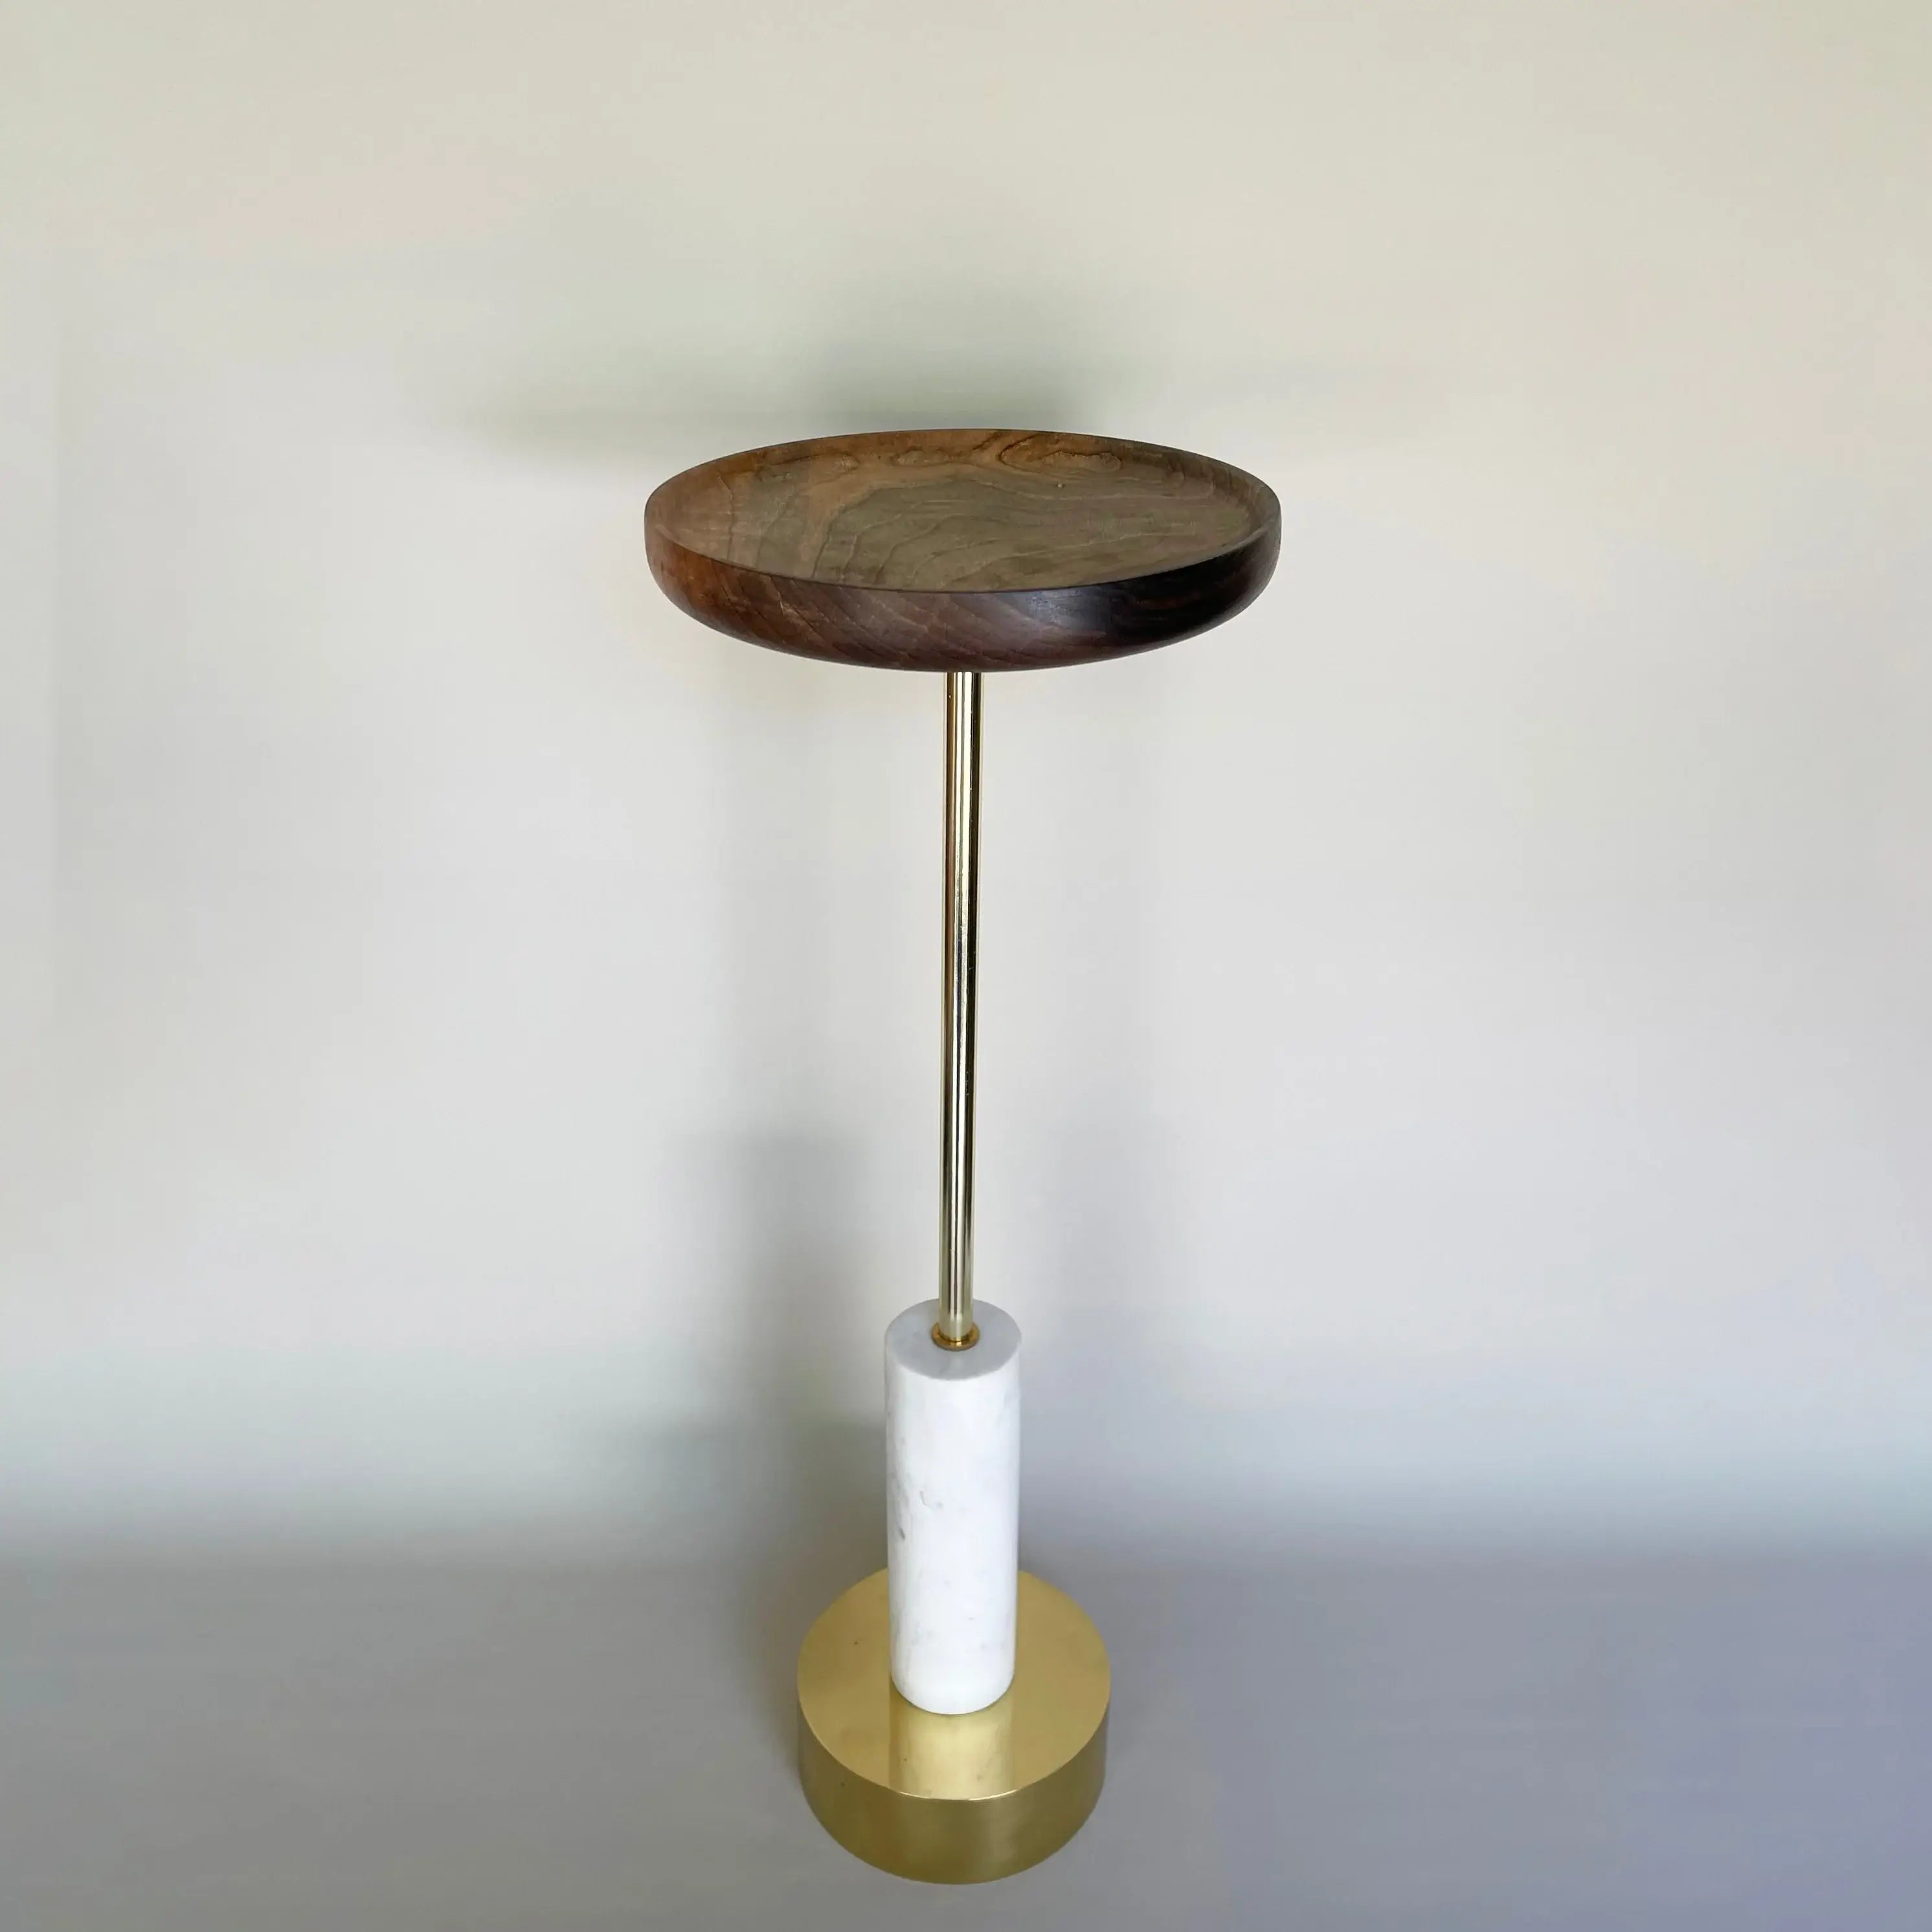 Dounia home Drink table in polished brass  made of White Marble, Model: Ari